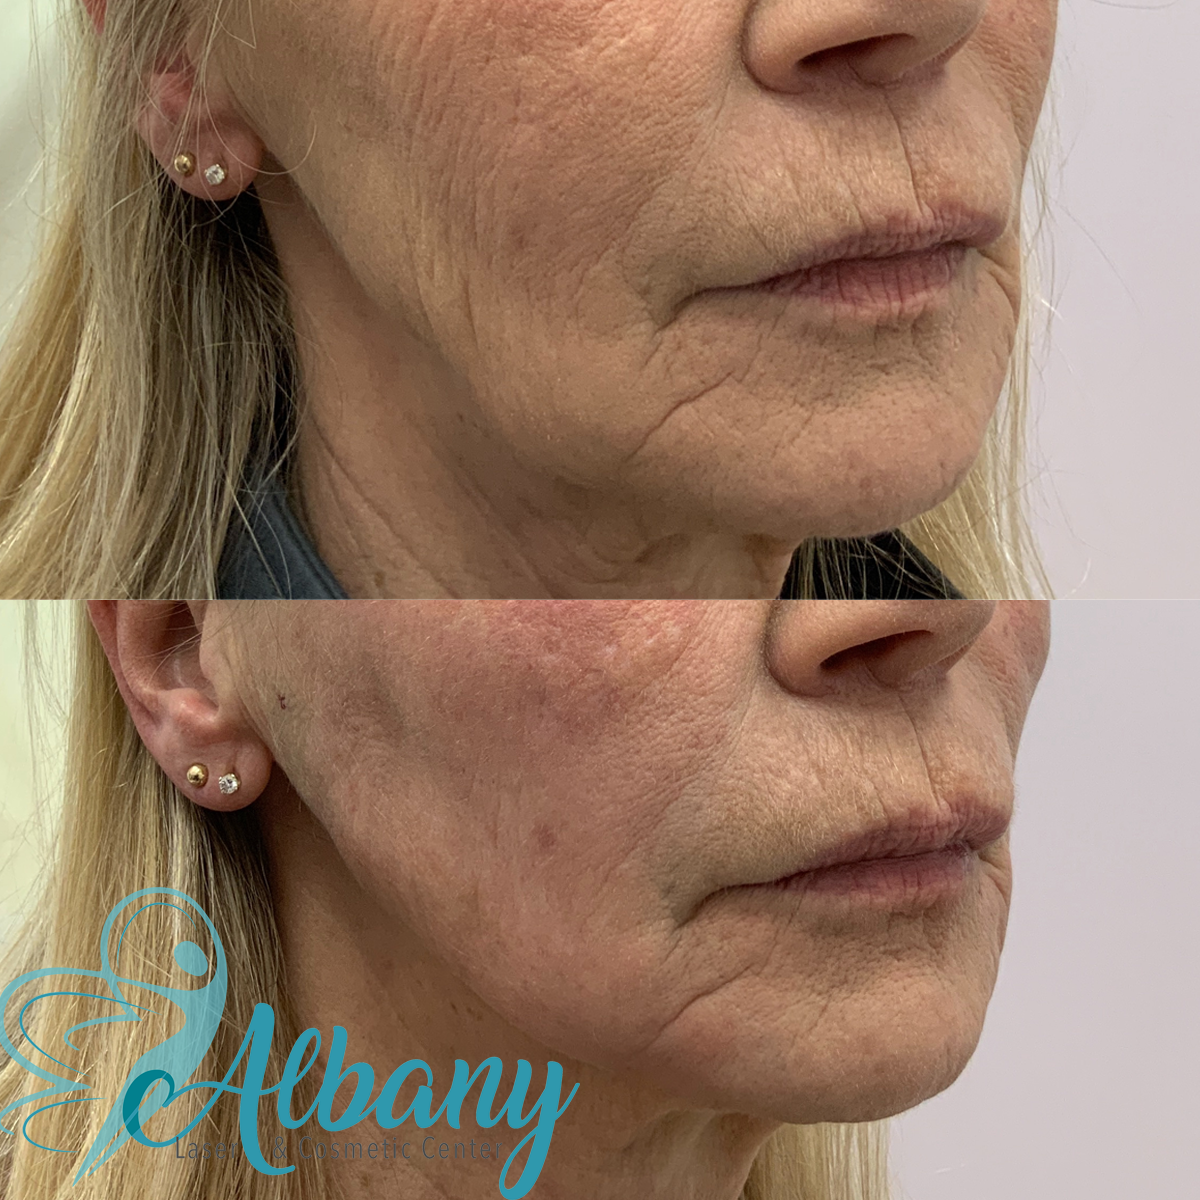 Close-up before and after images of a woman's lower face at Albany Laser & Cosmetic Center. The before image shows wrinkles and sagging skin around the mouth and jawline, while the after image reveals smoother and tighter skin.